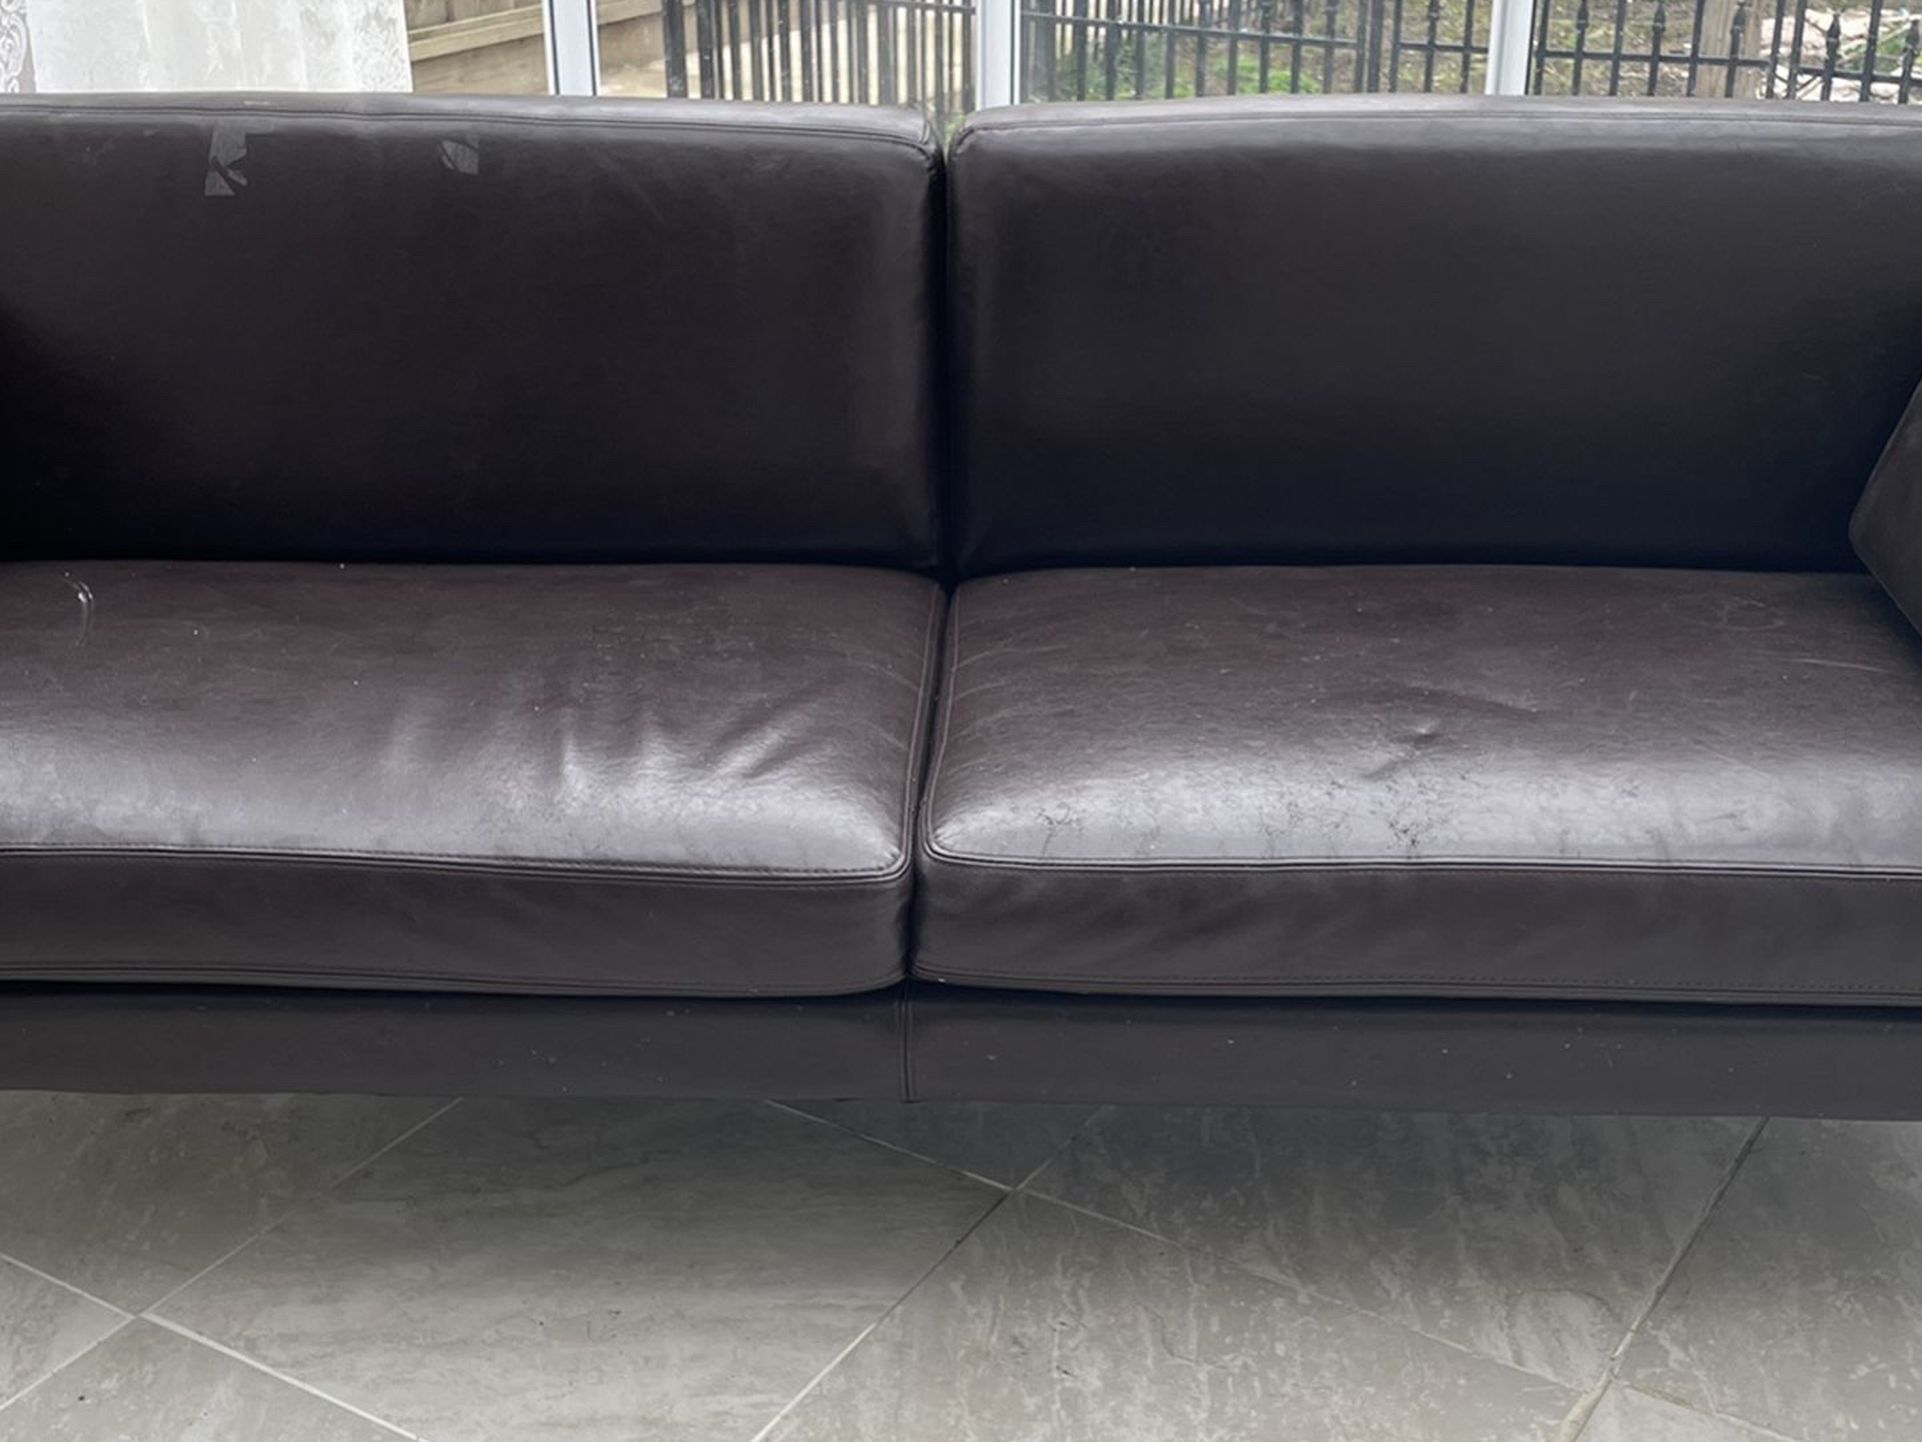 Fremont Area: FREE LOVESEAT - MUST PICK UP